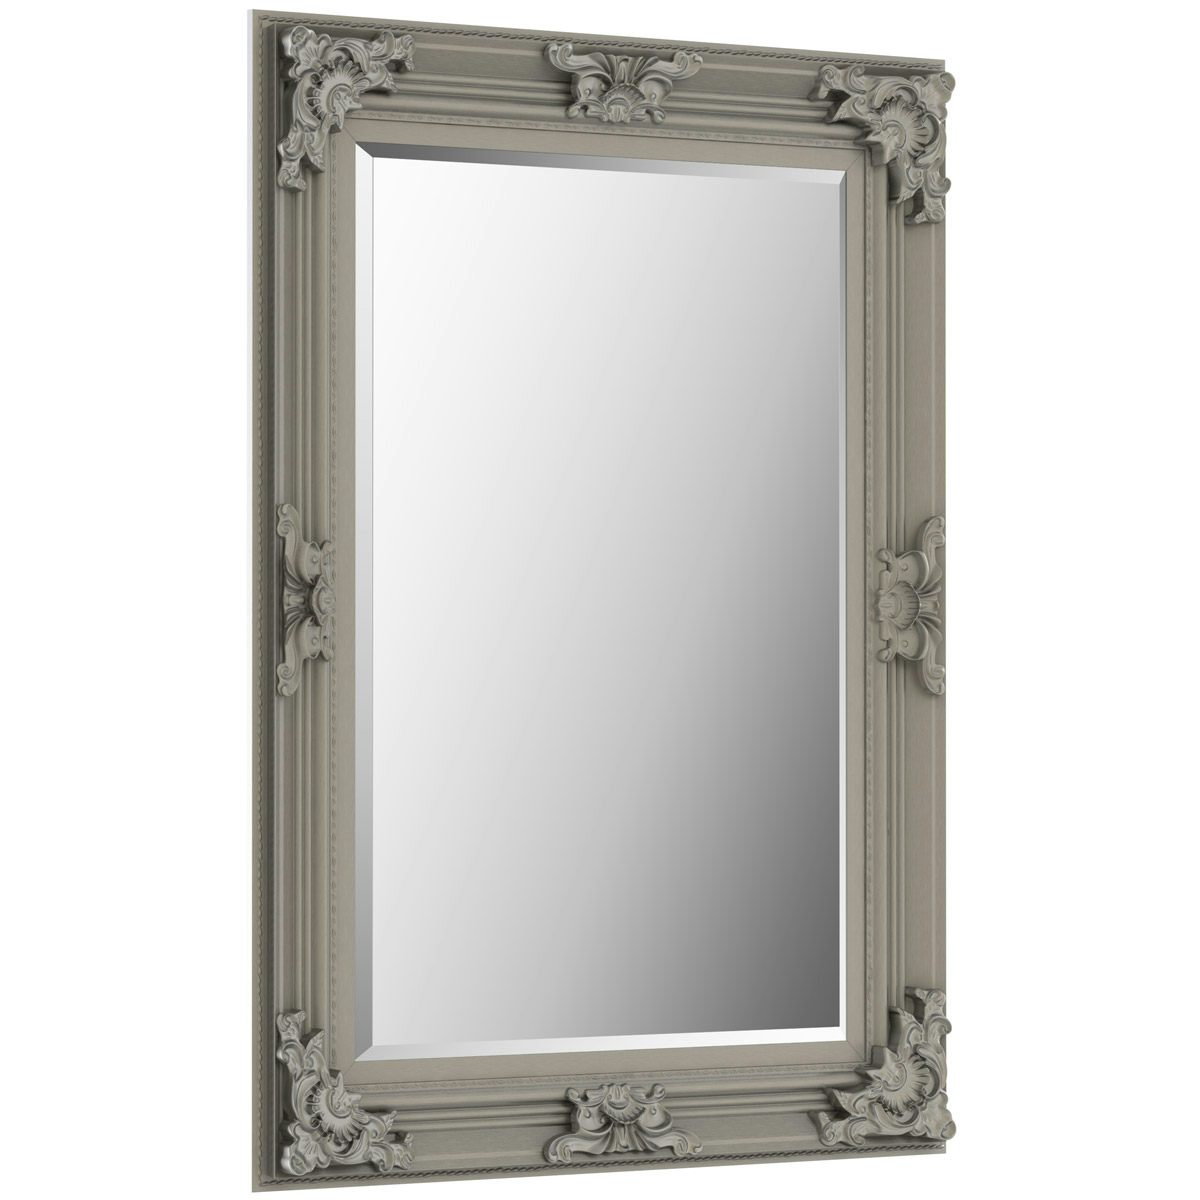 Accents Traditional antique silver mirror